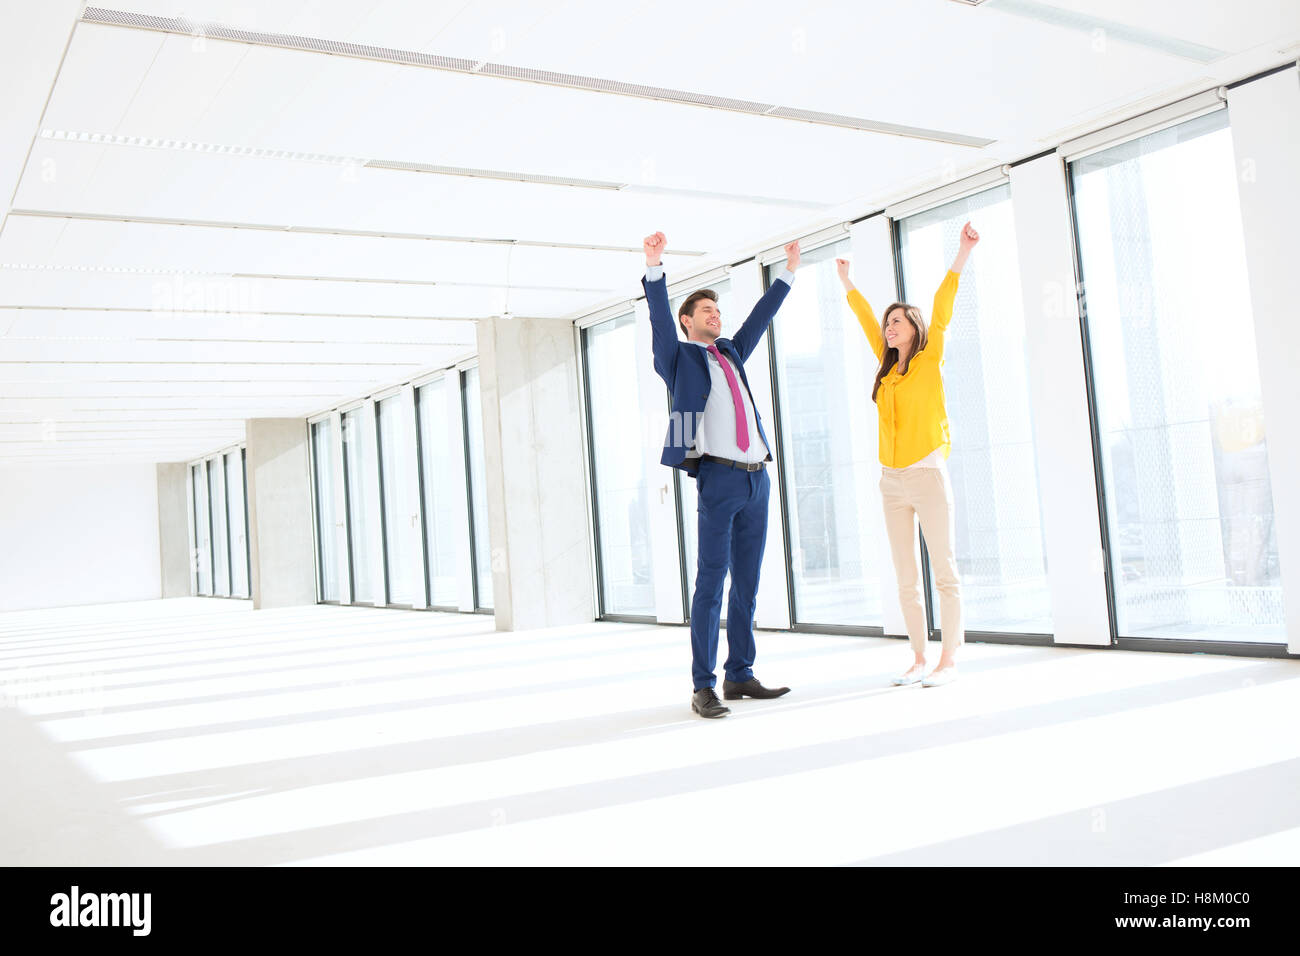 Full length of successful businessman and businesswoman with hands raised in empty office Stock Photo